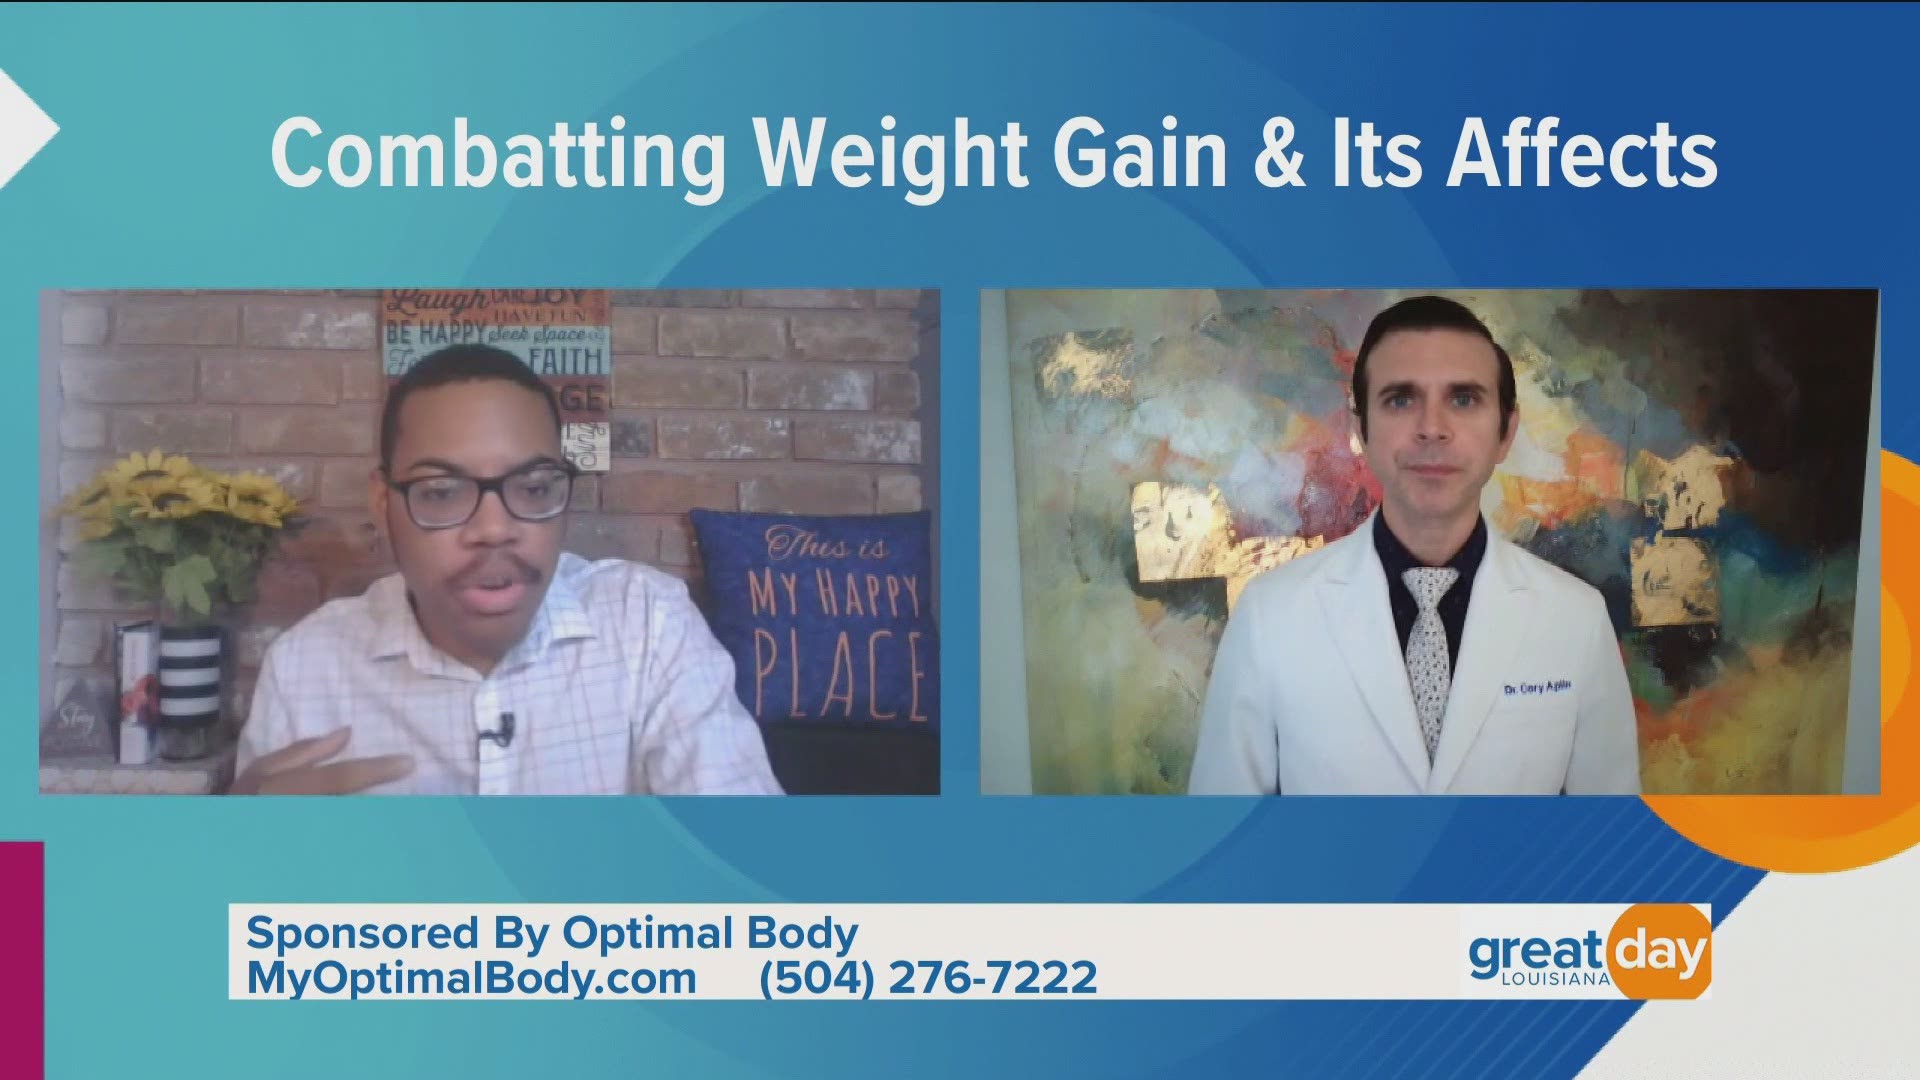 Optimal Body shares the missing piece when it comes to weight loss. For more go to www.myoptimalbody.com.